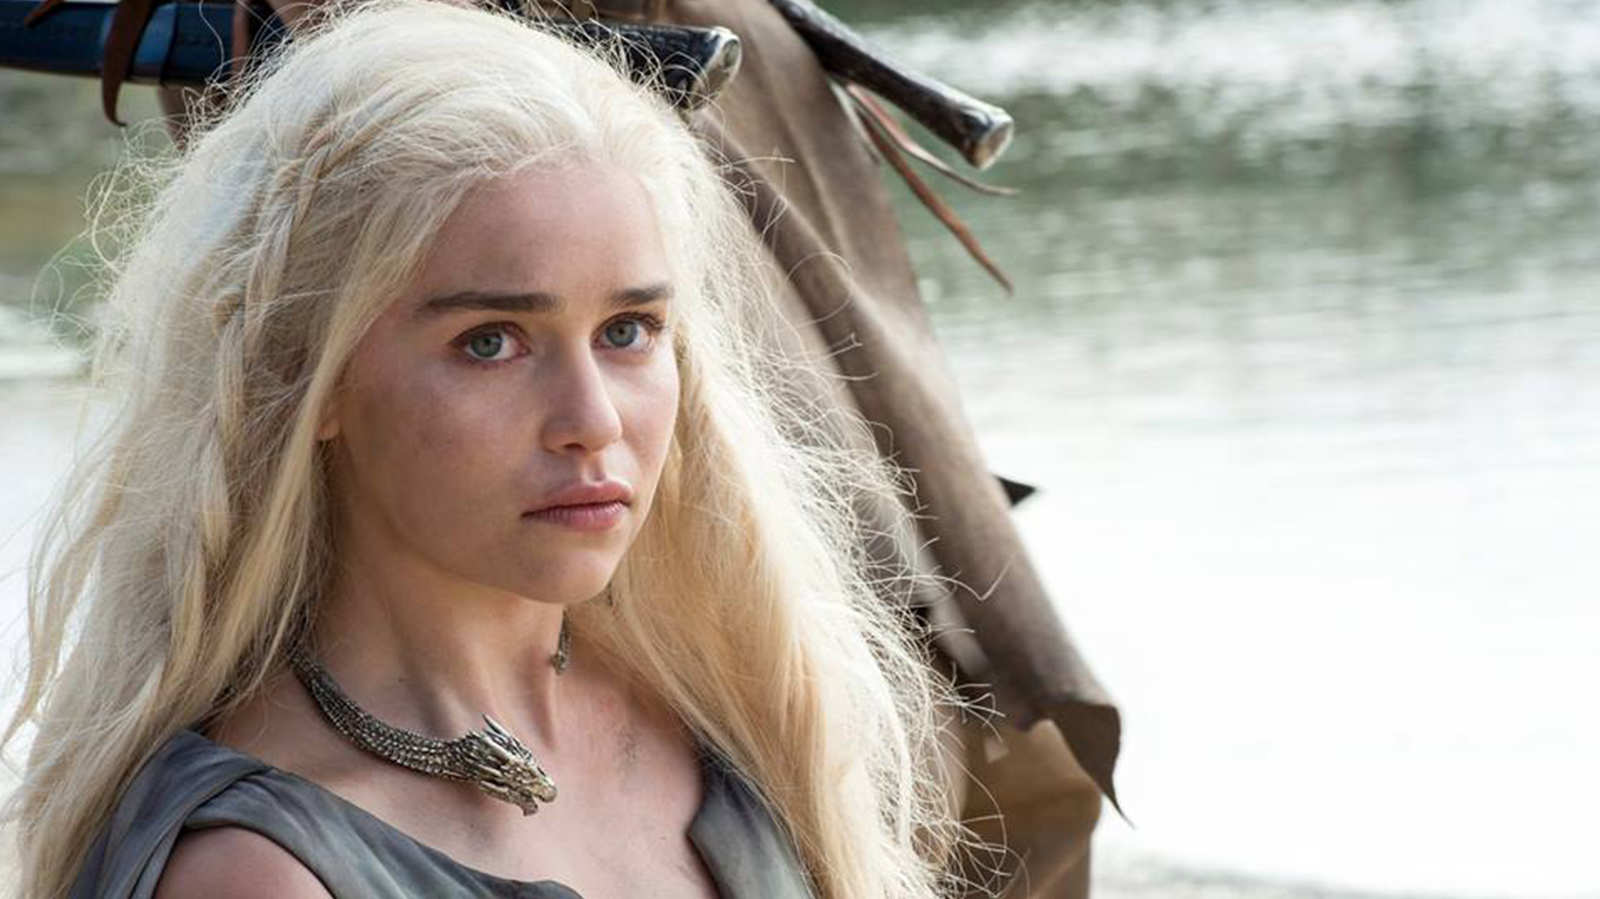 Game of Thrones: Girls, dragons and lessons for life